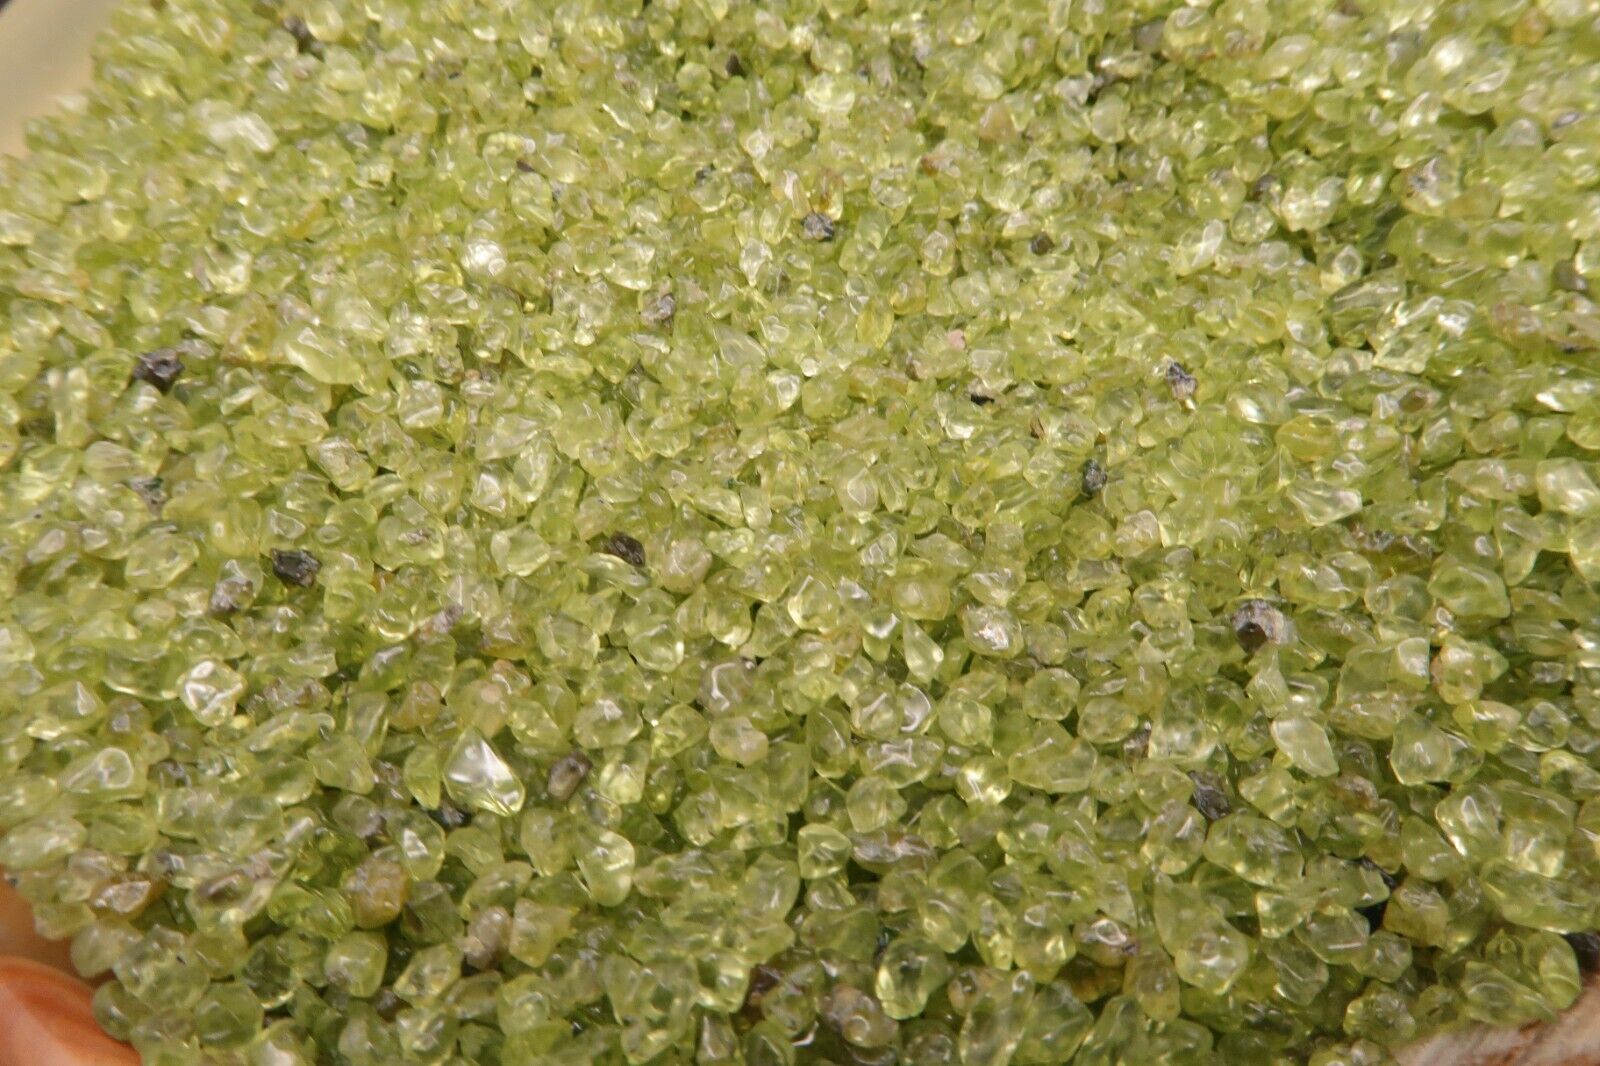 MINI POLISHED PERIDOT CHIPS - 1 lb lot - Extra Small Size - All Natural